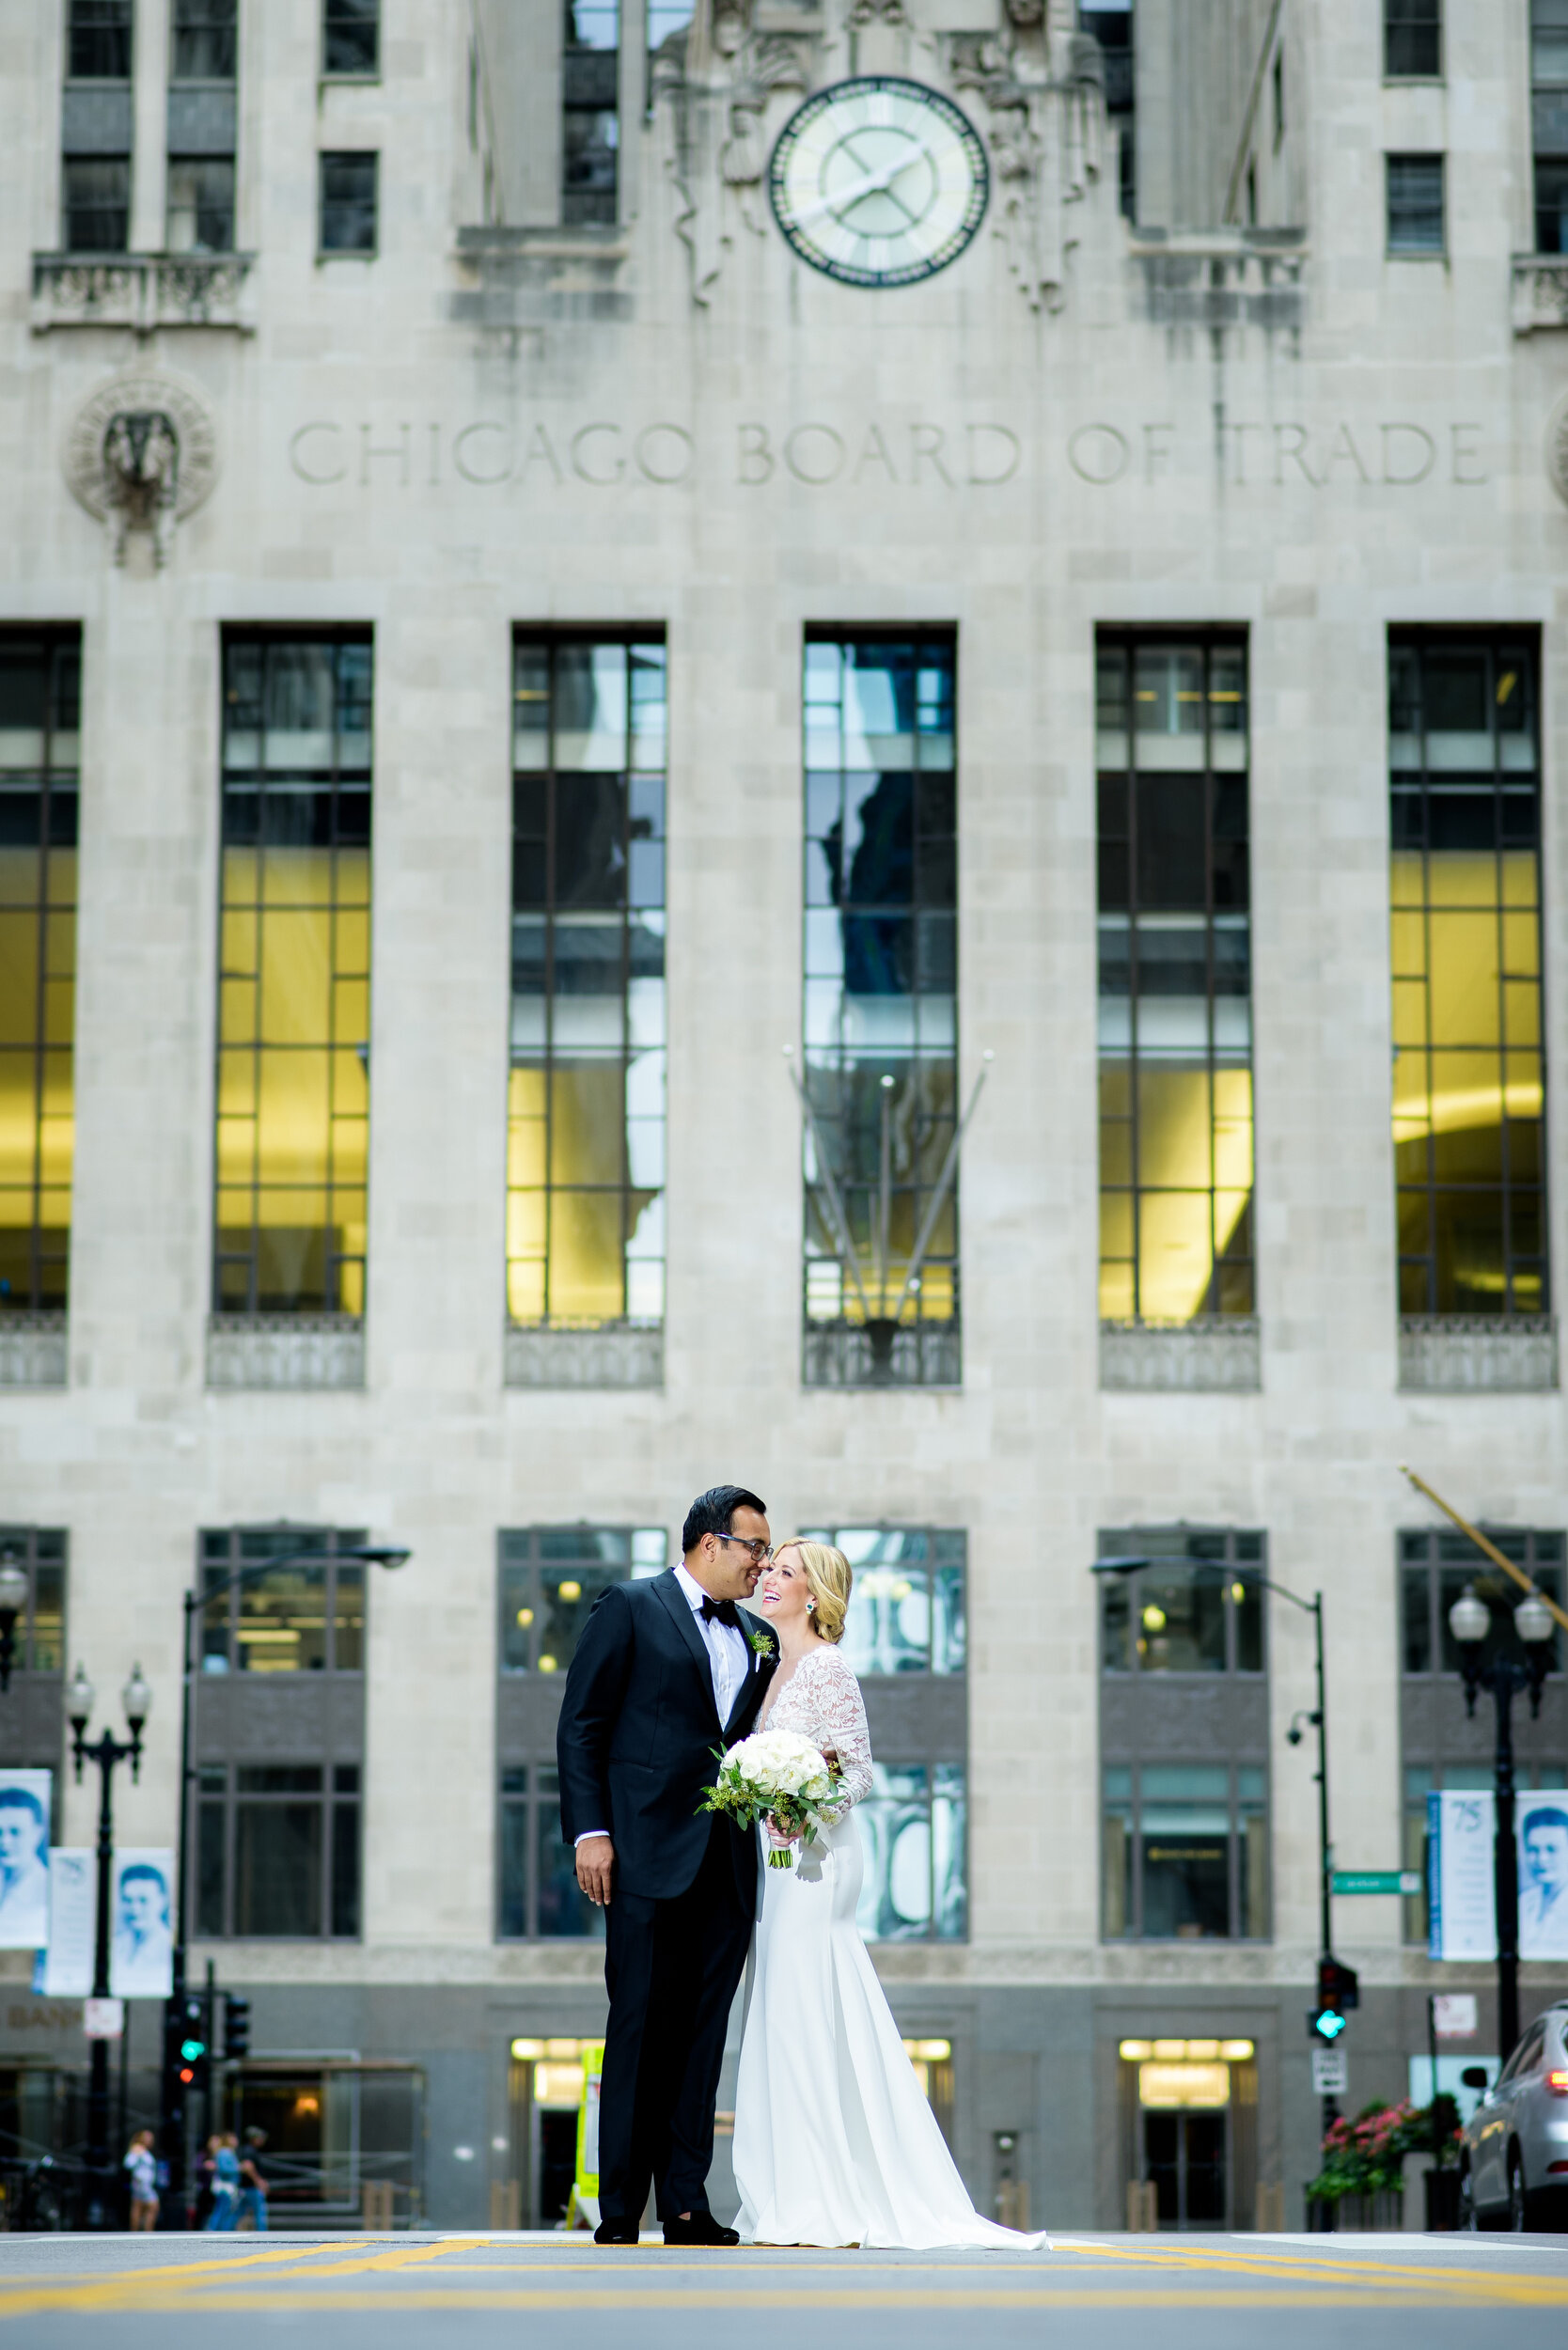 Wedding portrait of the couple outside the Board of Trade: Geraghty Chicago wedding photography captured by J. Brown Photography.